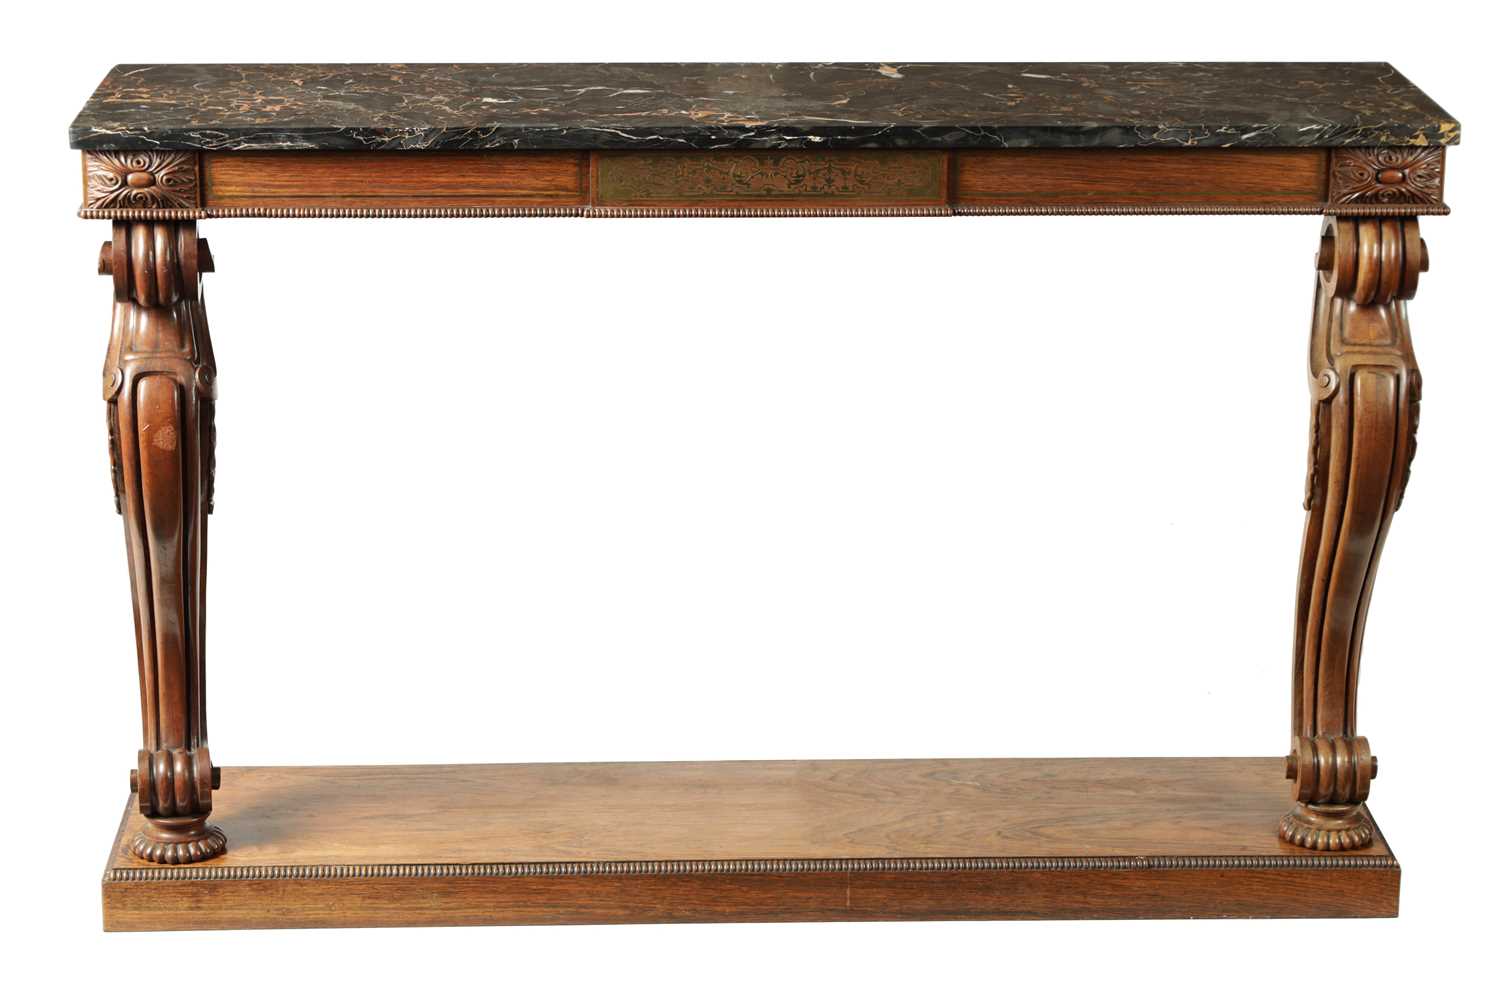 A REGENCY ROSEWOOD BRASS INLAID CONSOLE TABLE